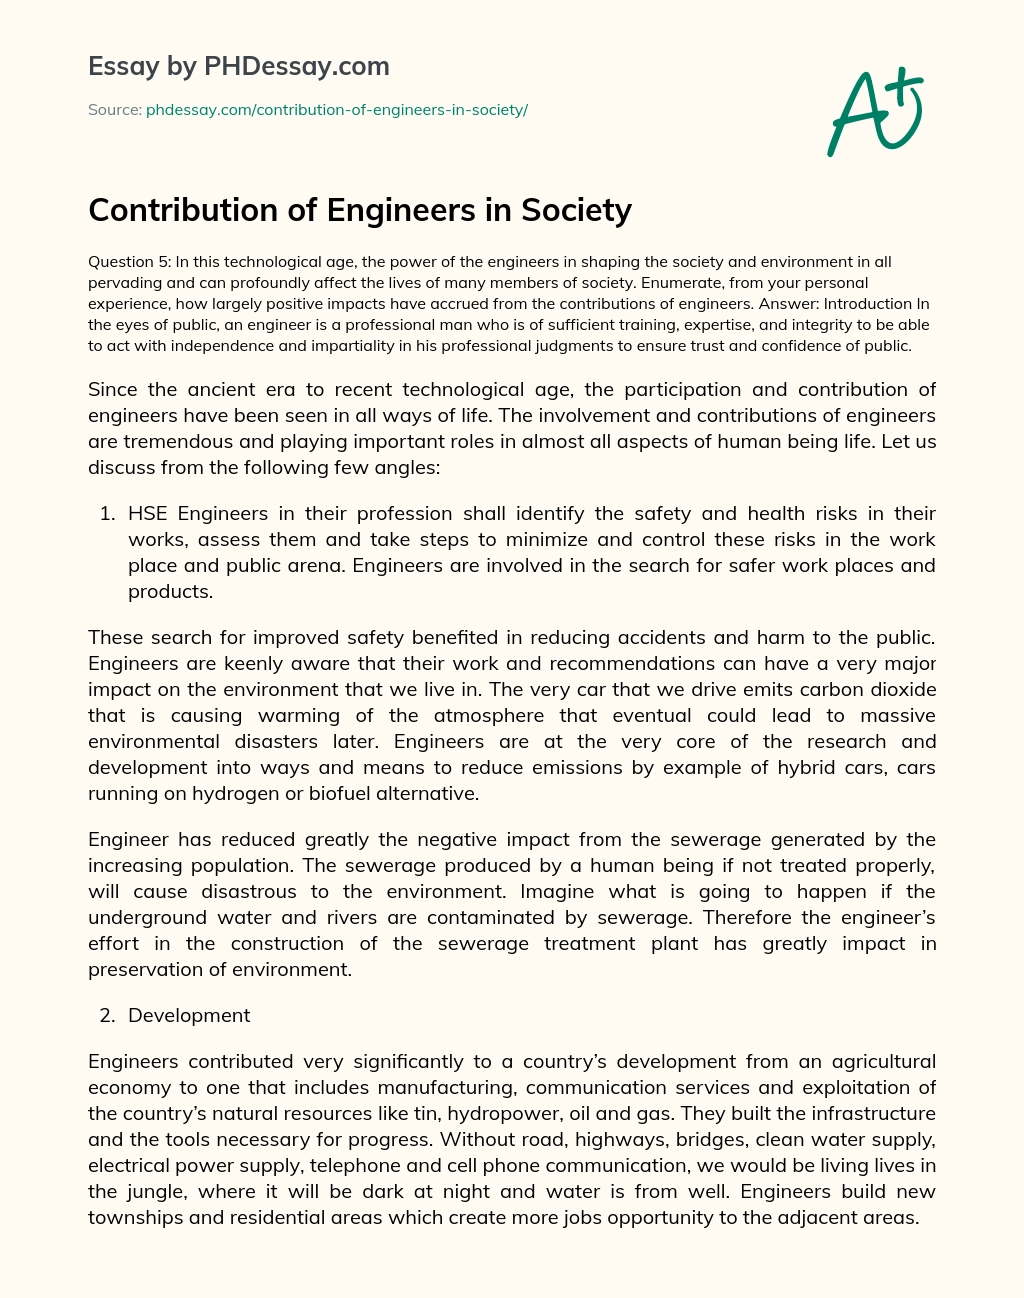 Contribution of Engineers in Society essay